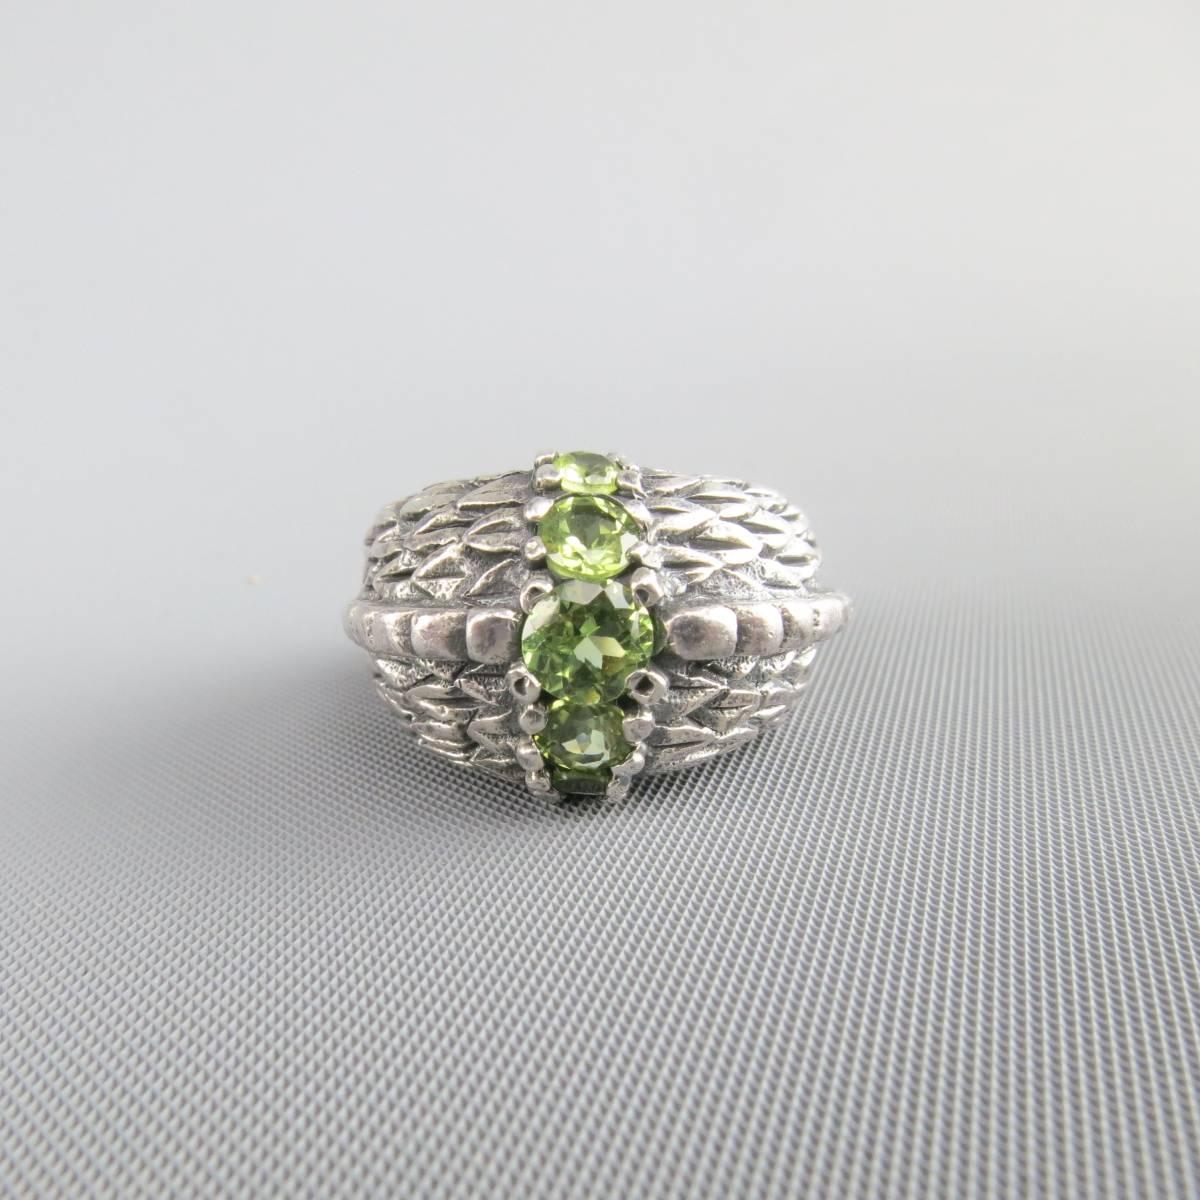 Vintage sterling silver ring featuring an engraved armor textured band with a row of green gems in cascading sizes.
 
Good Pre-Owned Condition.
 
Size: 7.5
